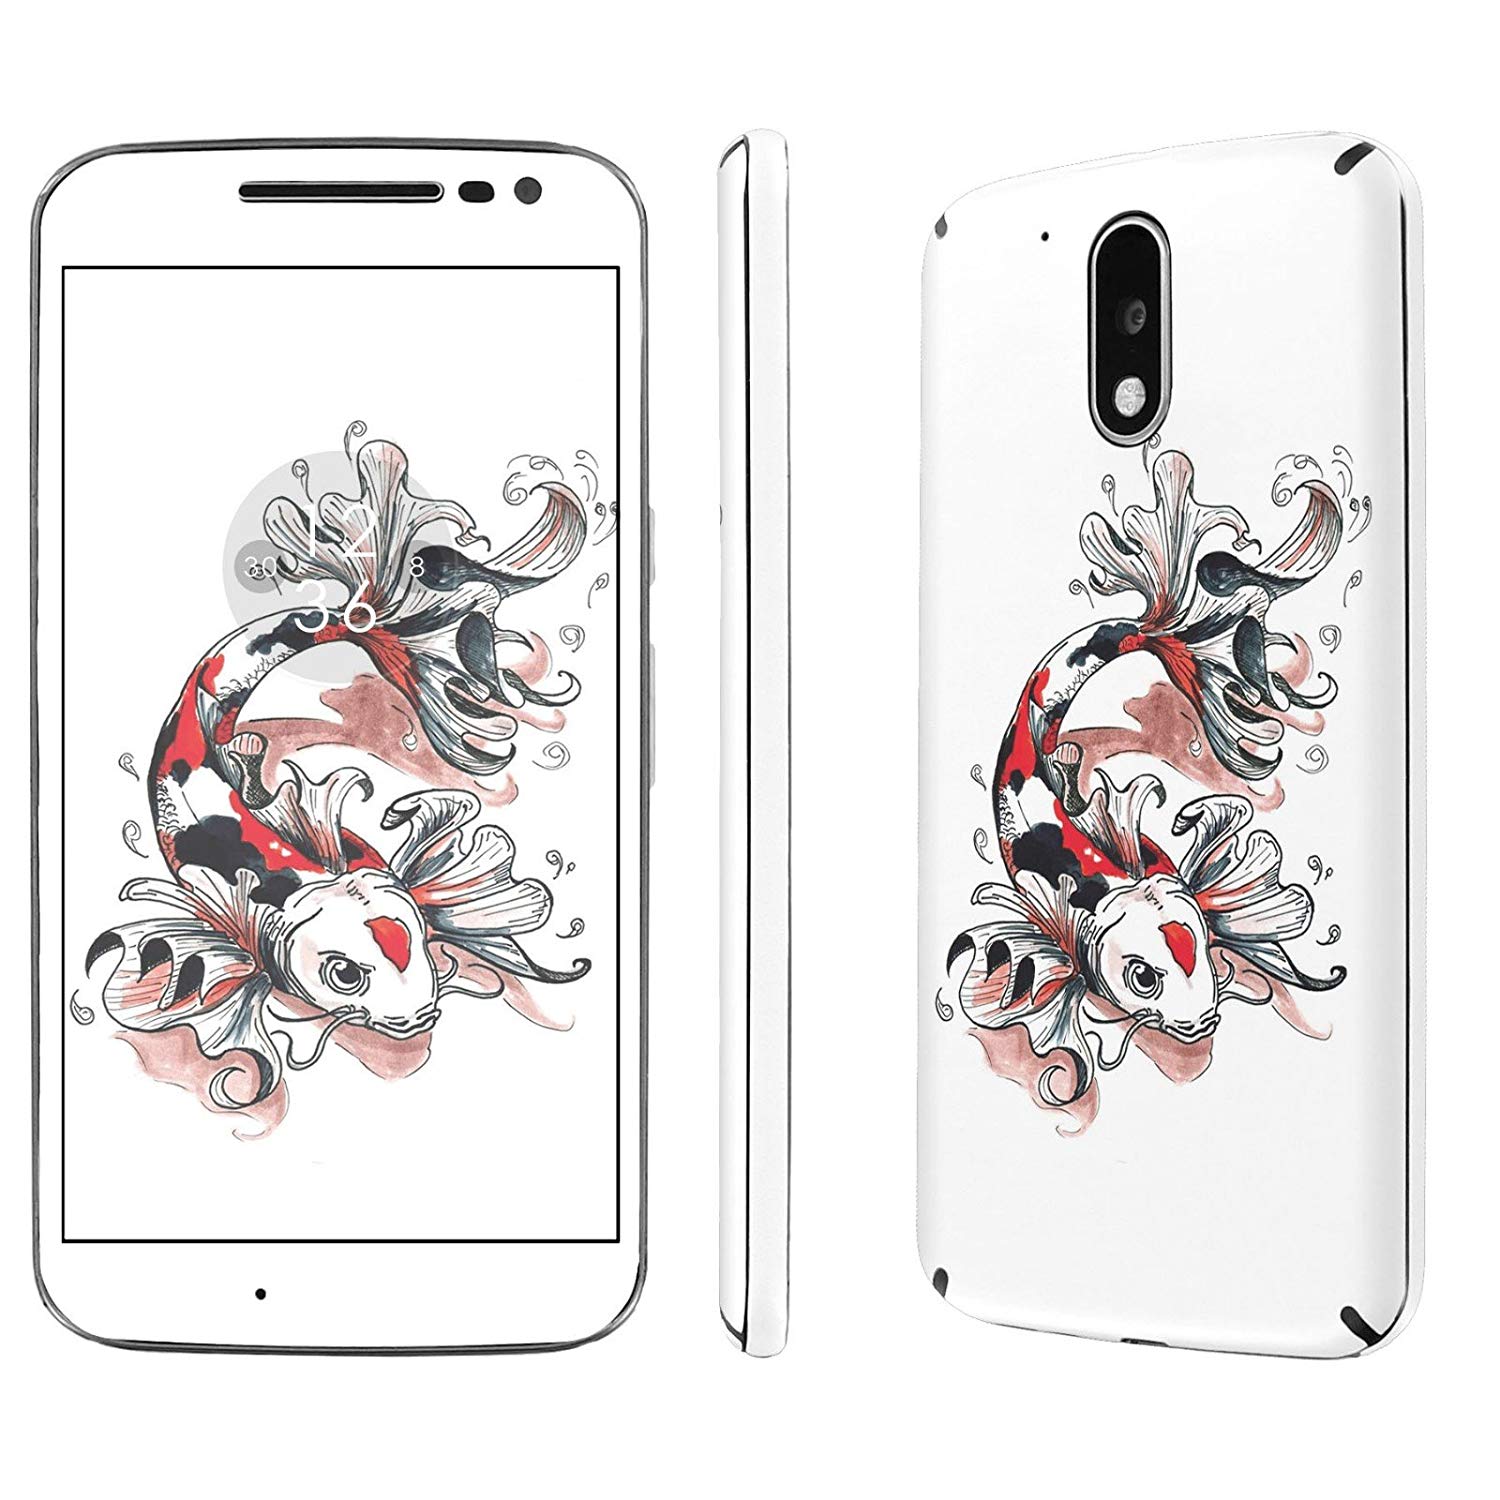 Moto [g4] Skin [nakedshield] Scratch Guard Vinyl Skin - Koi Fish And Dragon Tattoo Meaning , HD Wallpaper & Backgrounds